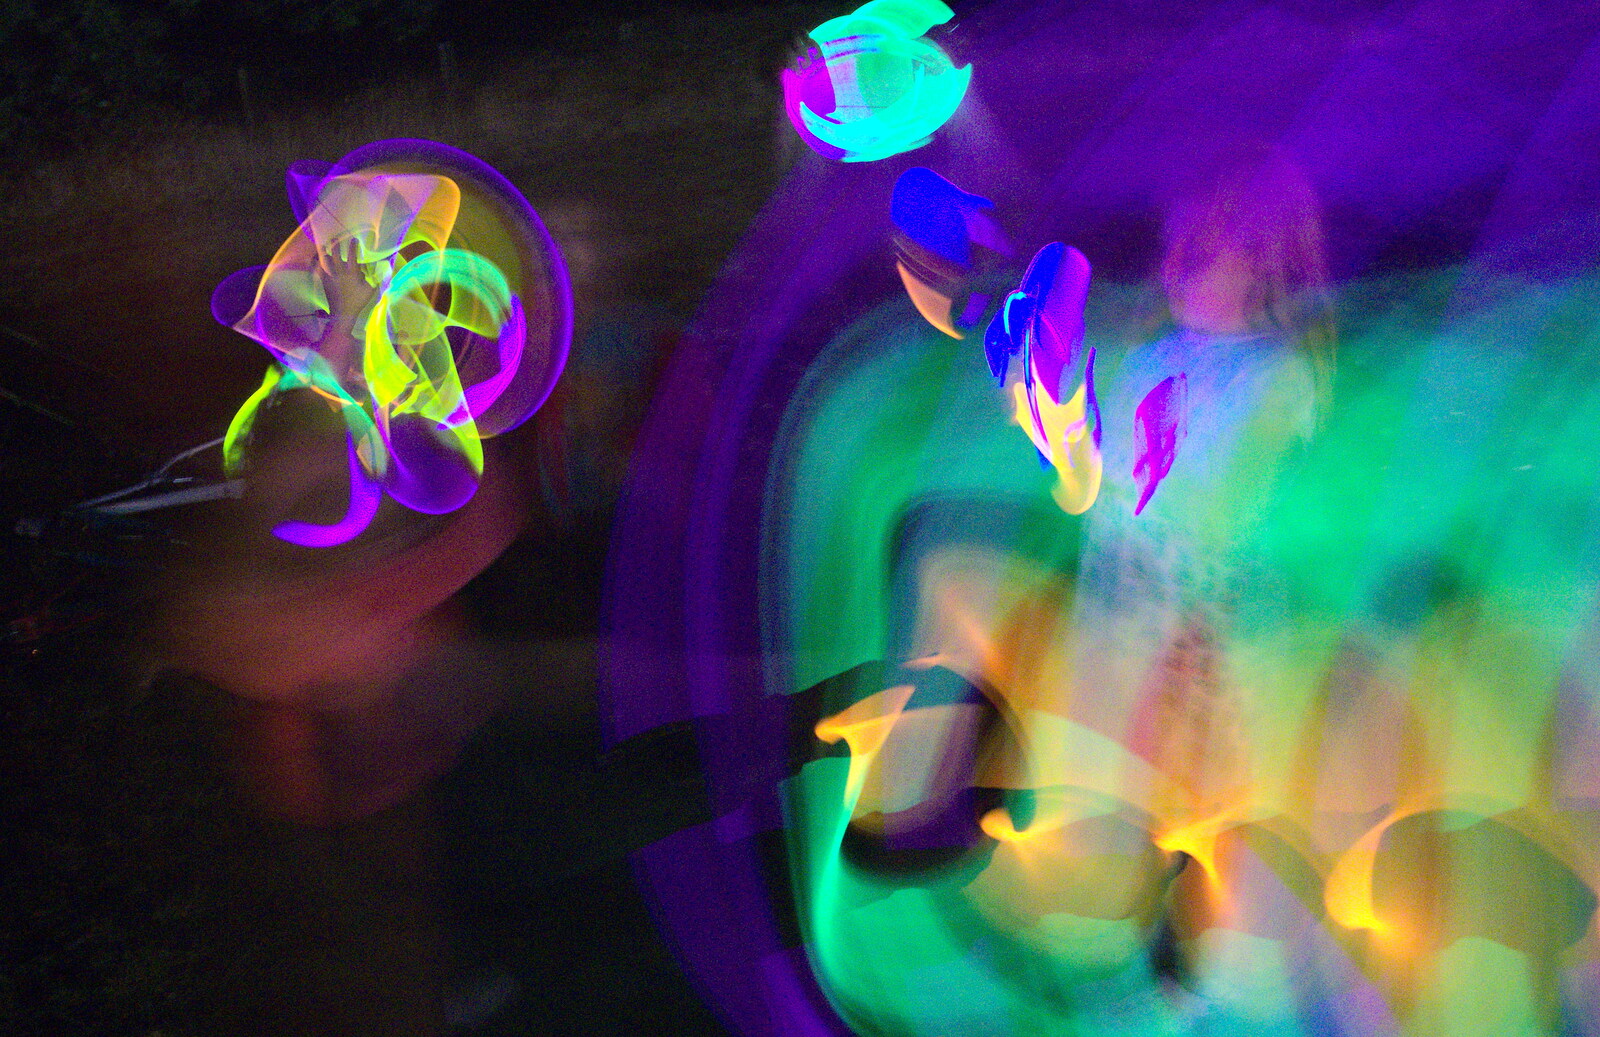 More glowstick action from A Spot of Camping, Alton Water, Stutton, Suffolk - 1st September 2018